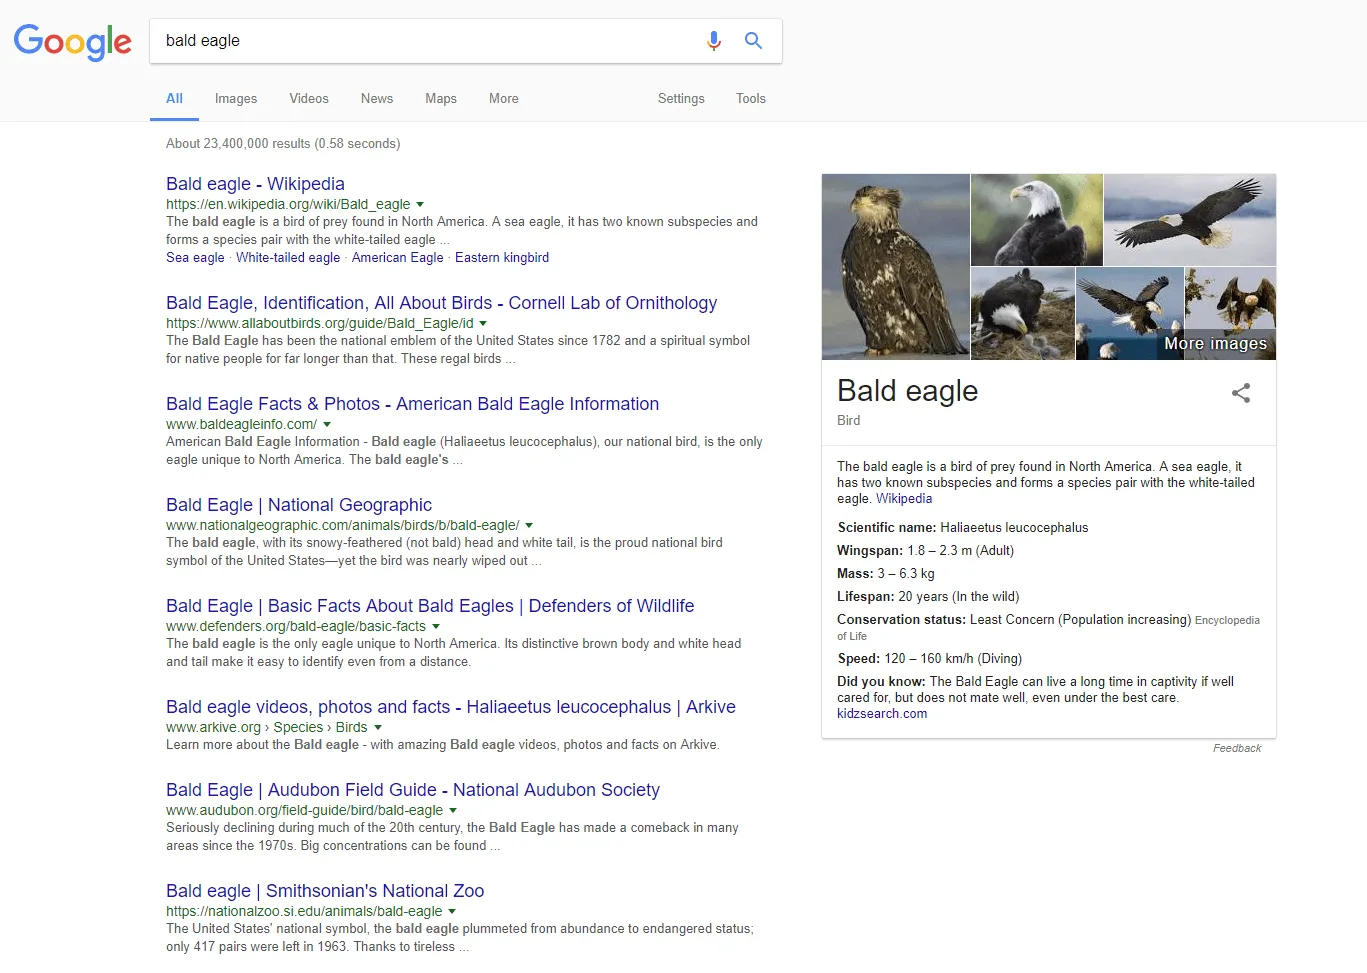 Example of Google SERP feature